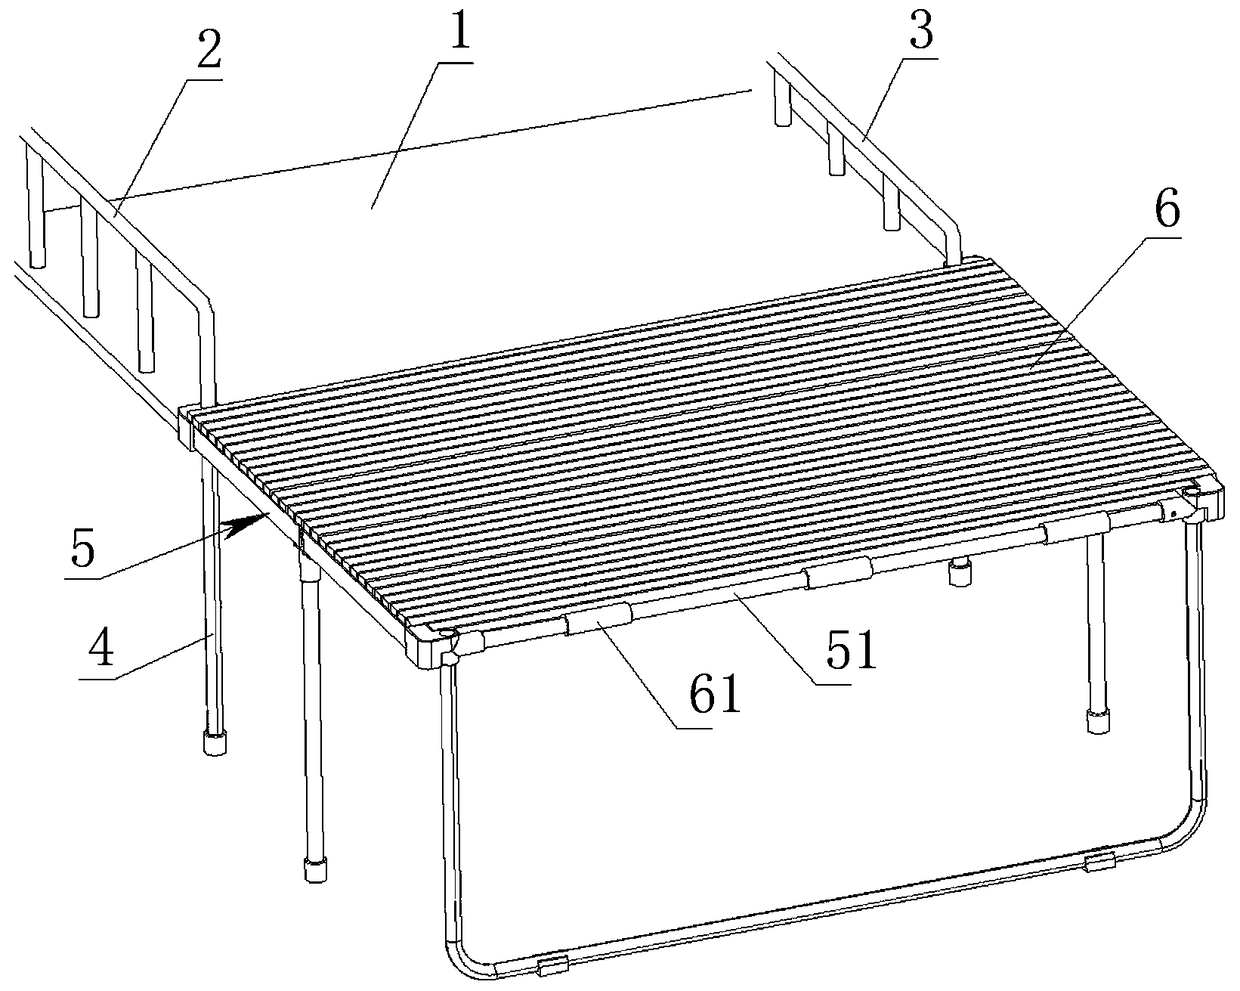 Extended folding bed for accompanying person